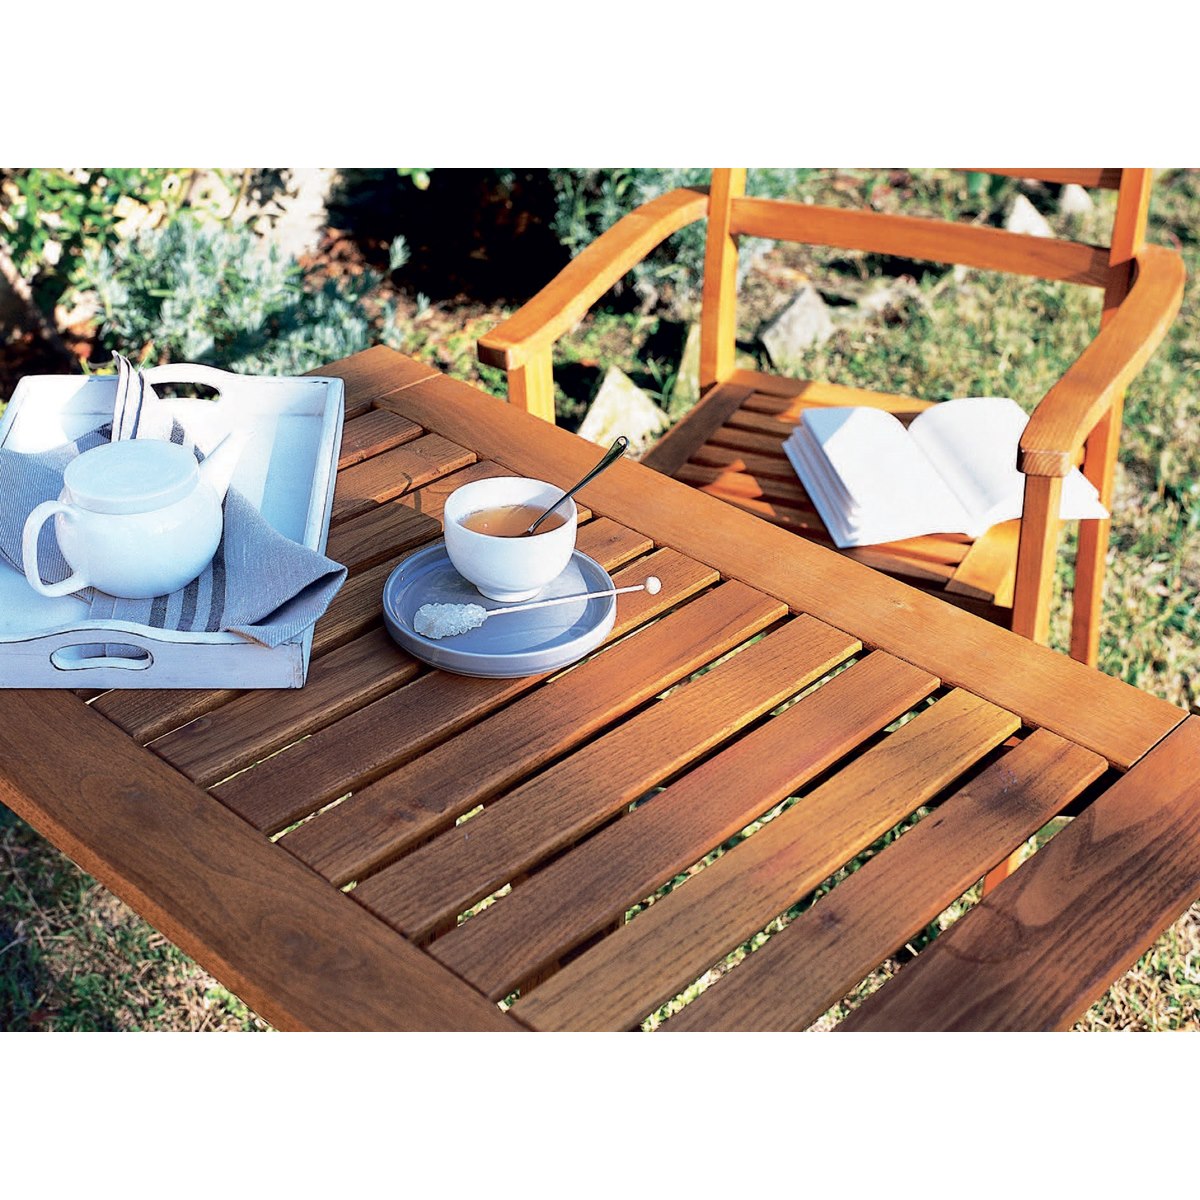 Clear Oil for Garden Furniture